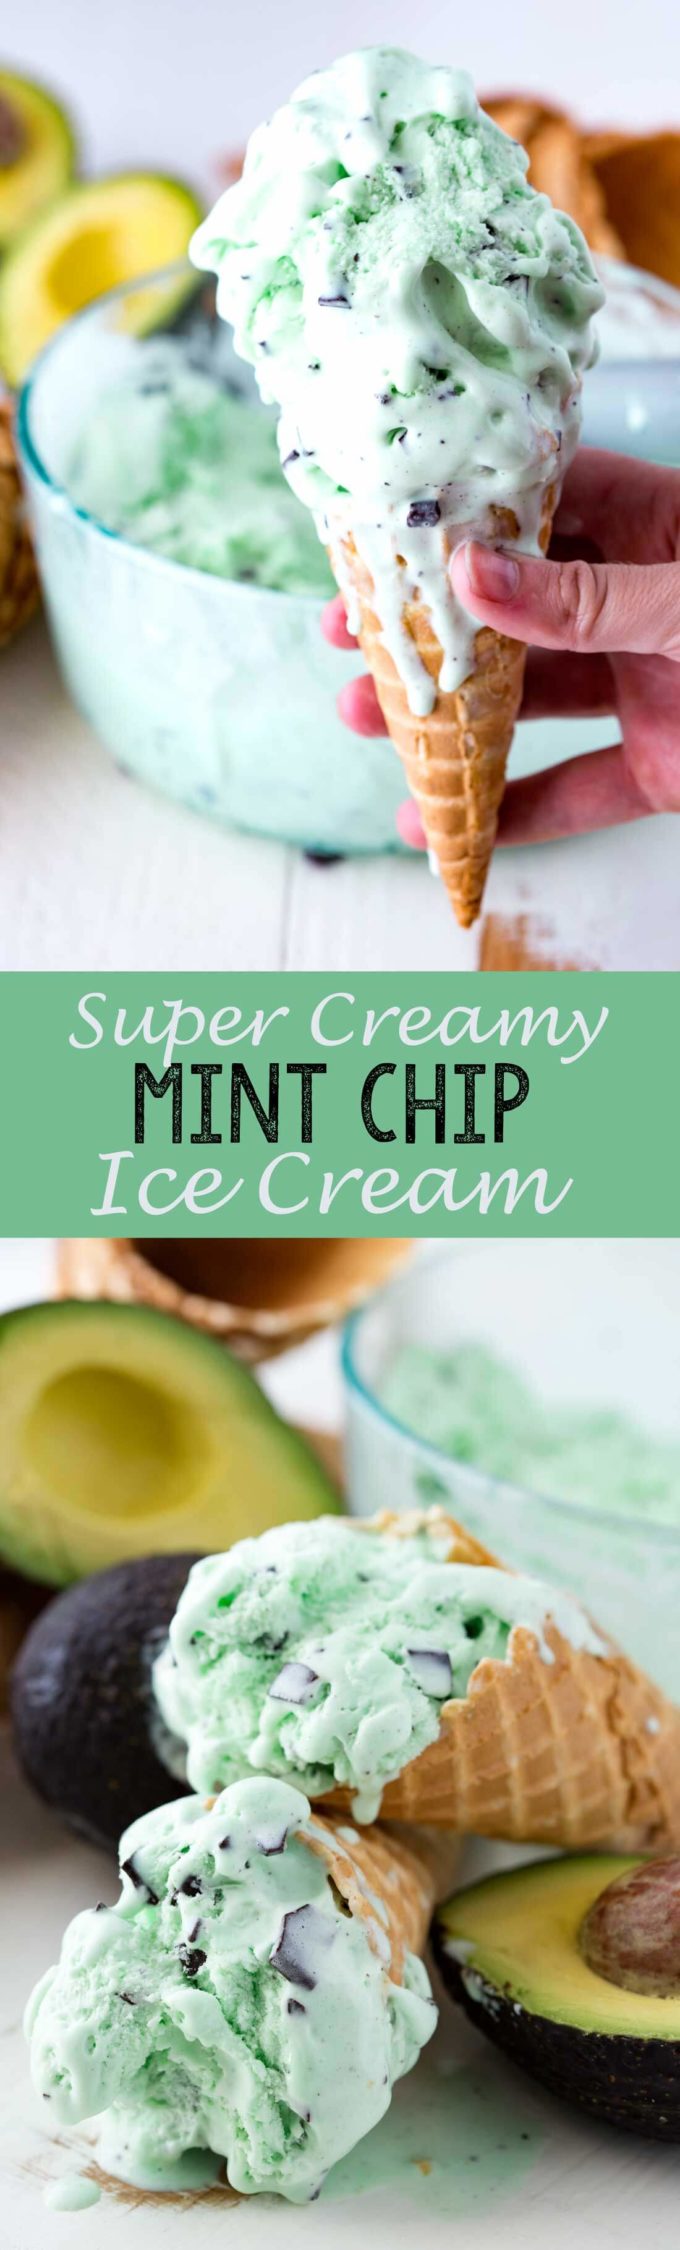 Super Creamy Mint Chip Ice Cream with secret ingredient is a fantastic refreshing way to cool down!